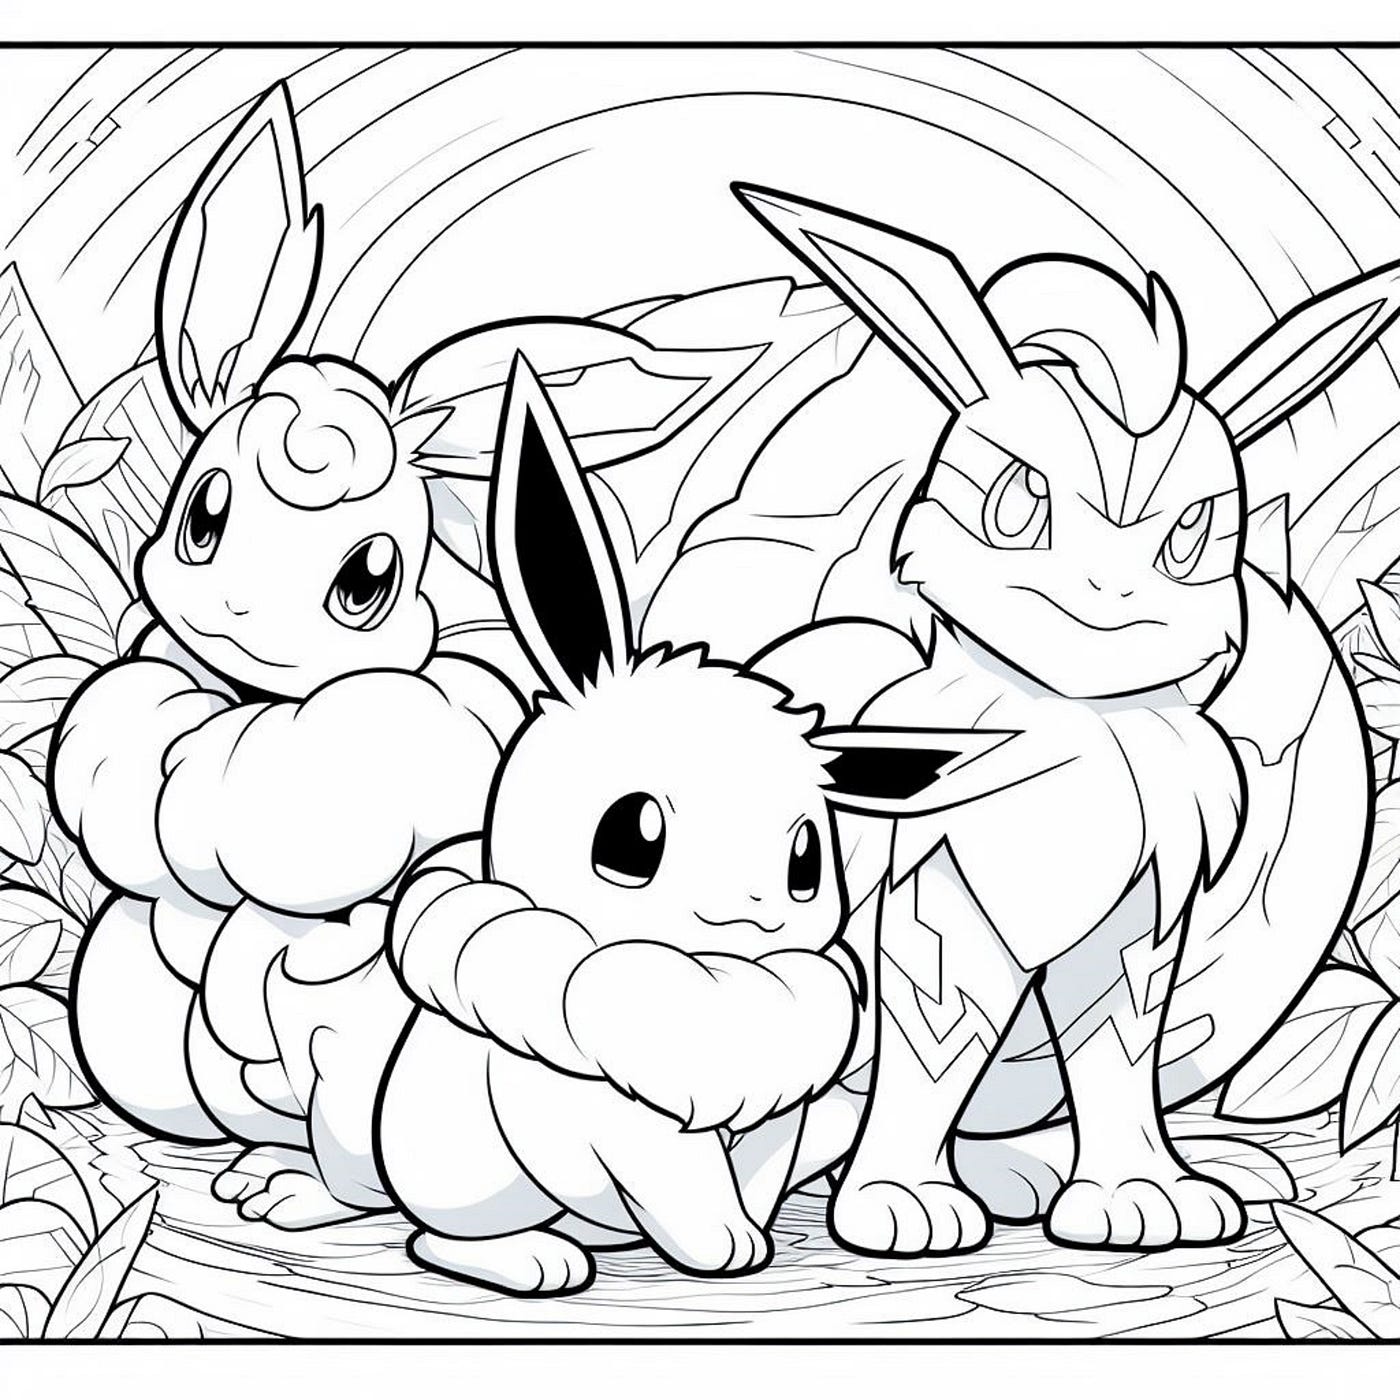 100 Best Pokemon Coloring Pages. Welcome to the vibrant world of